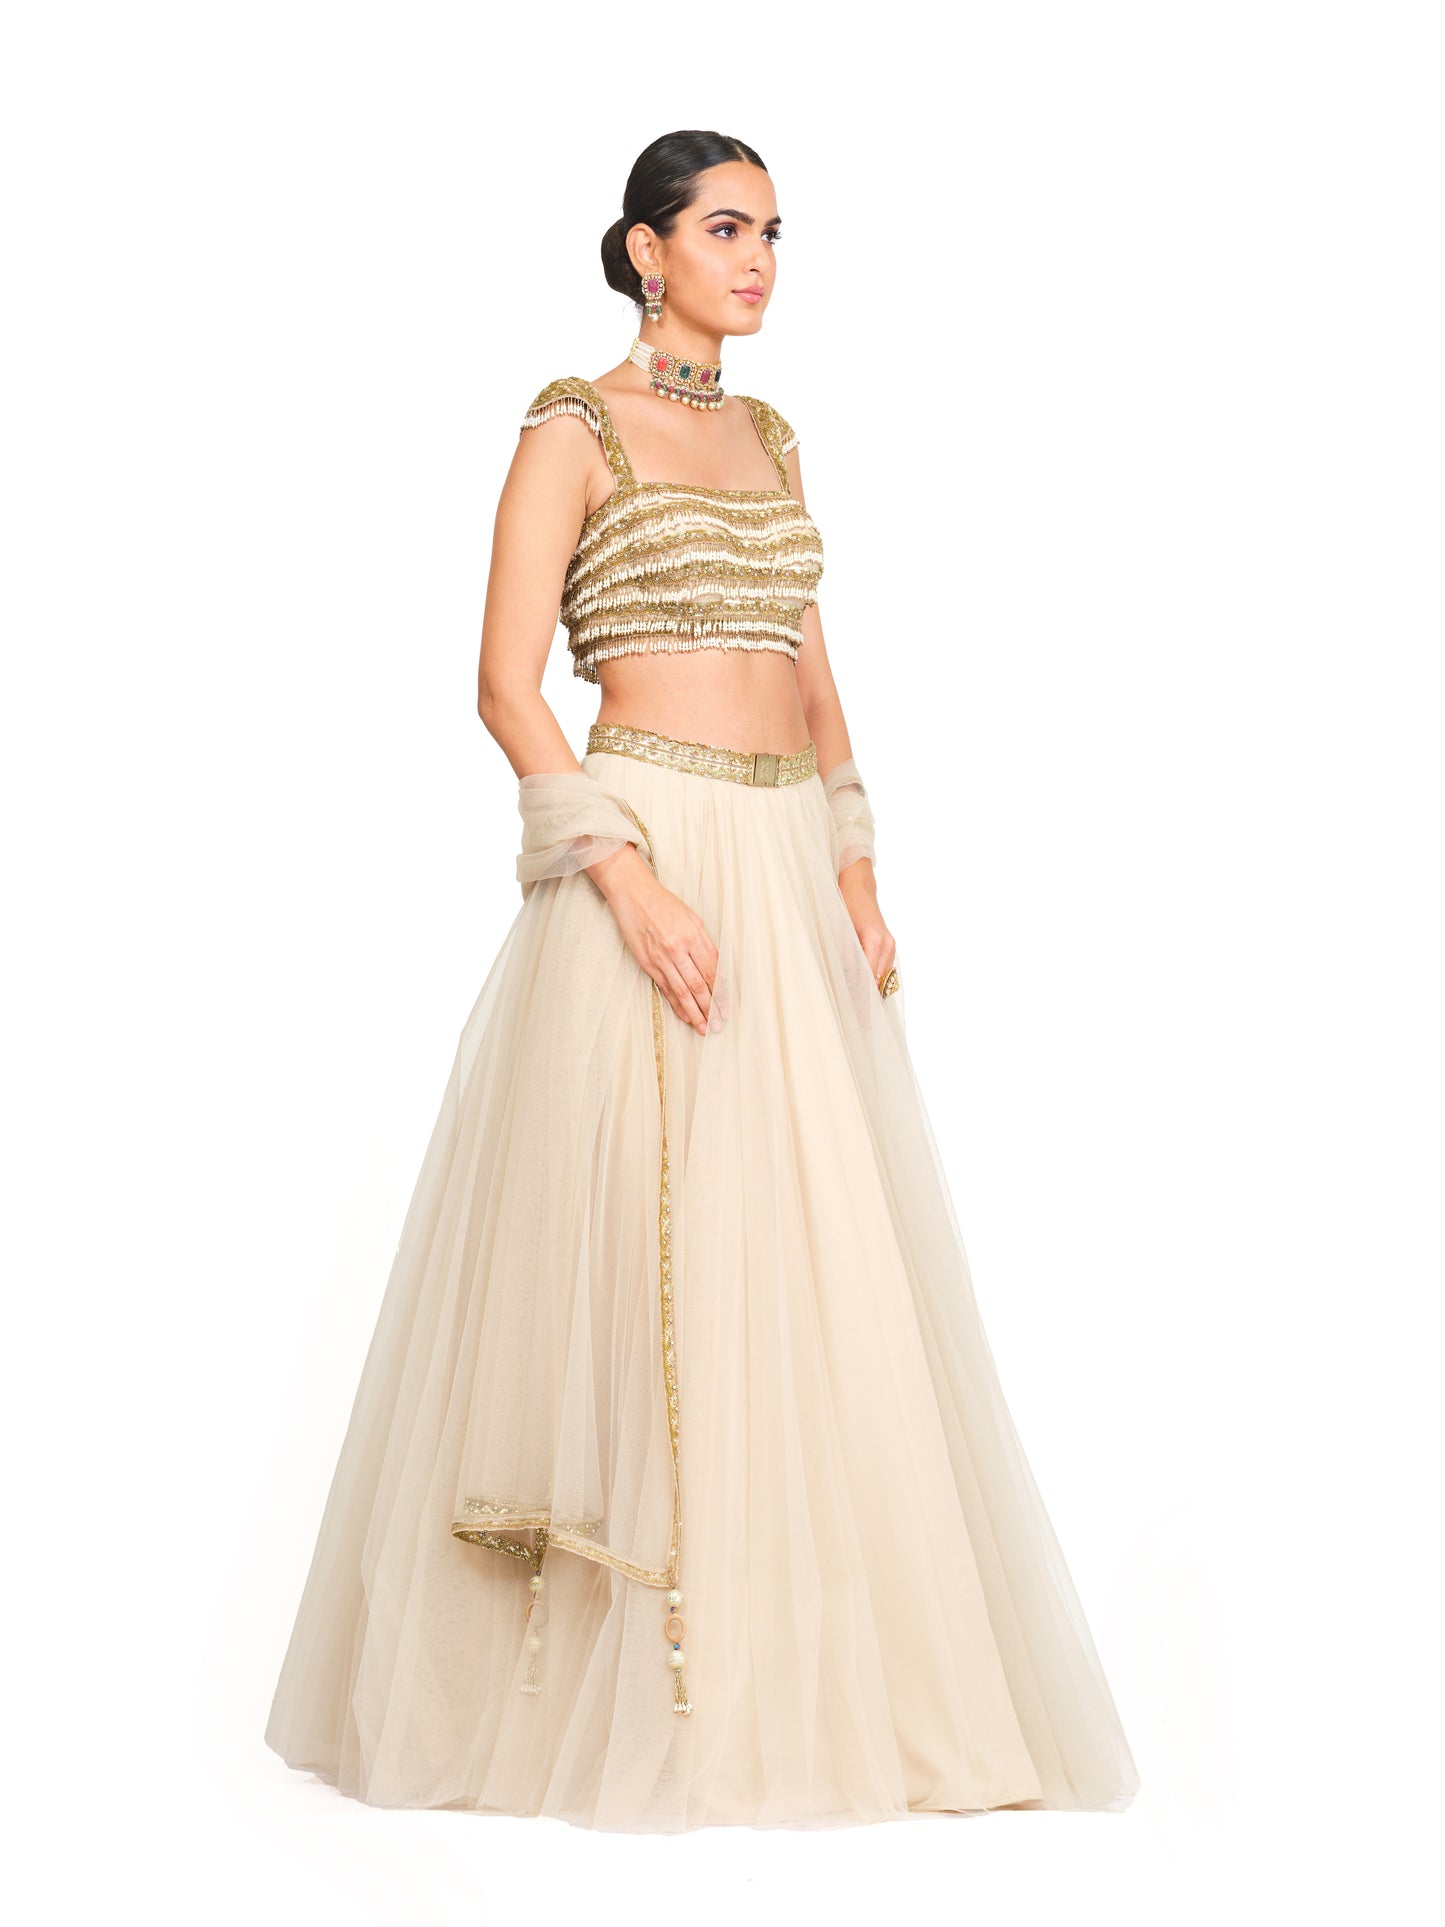 Tulle Lehenga with Tassel Strapped Bloused